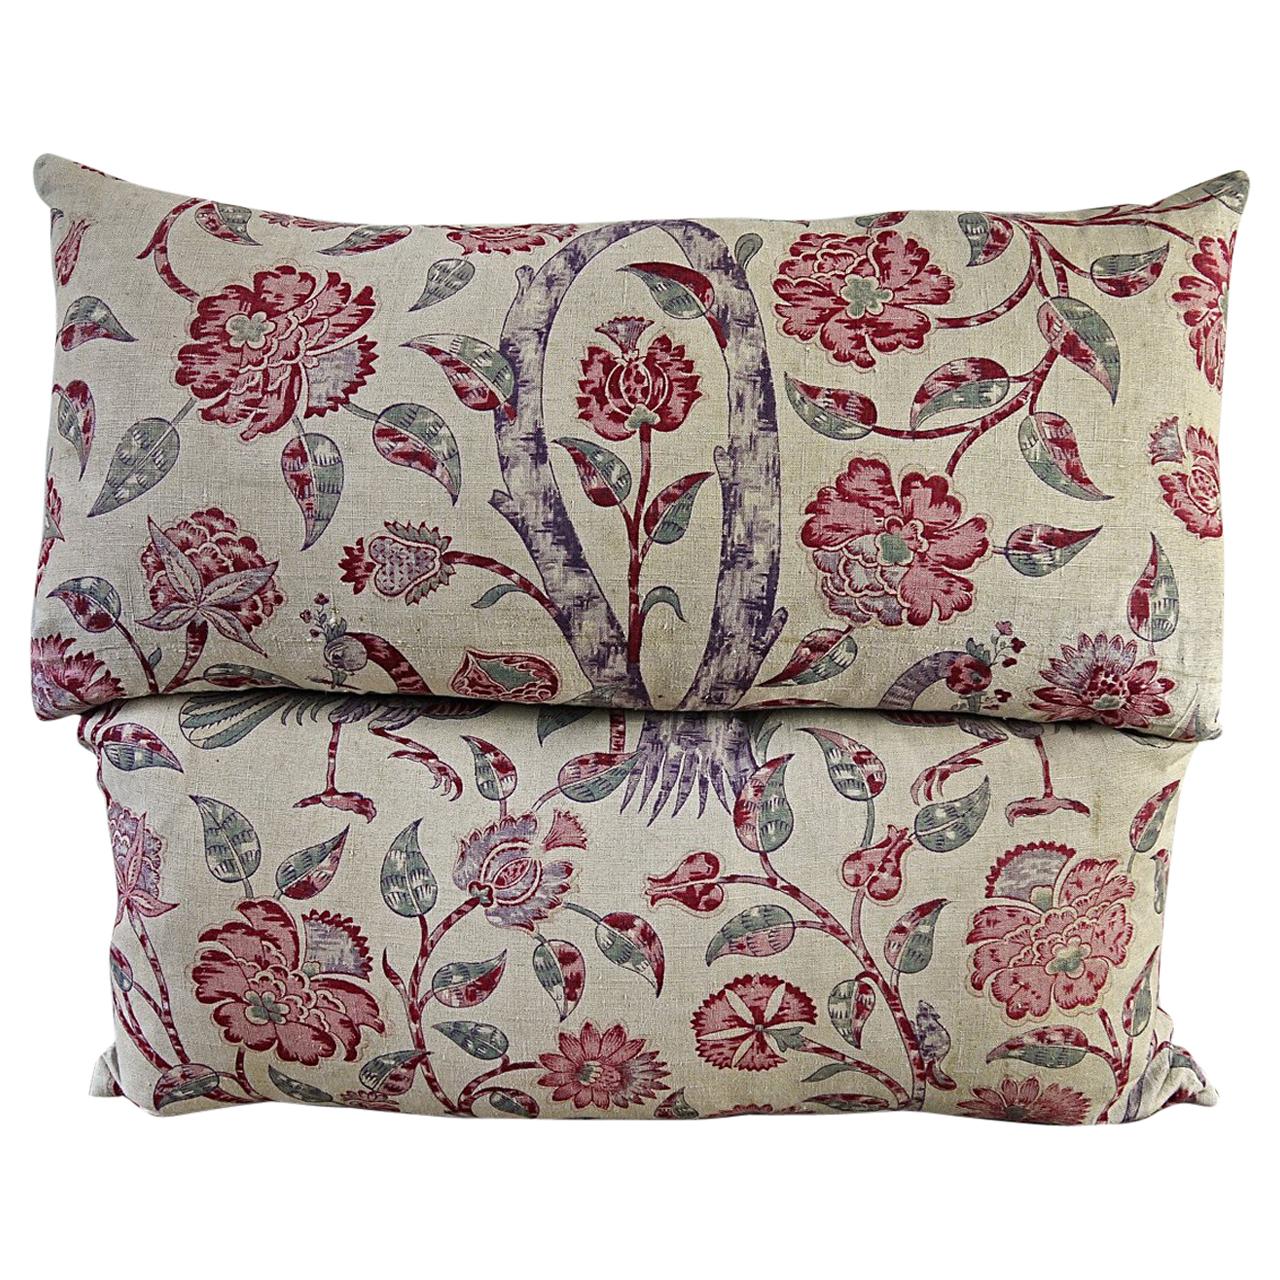 Pair of Pink Floral Linen Pillows French, 19th Century